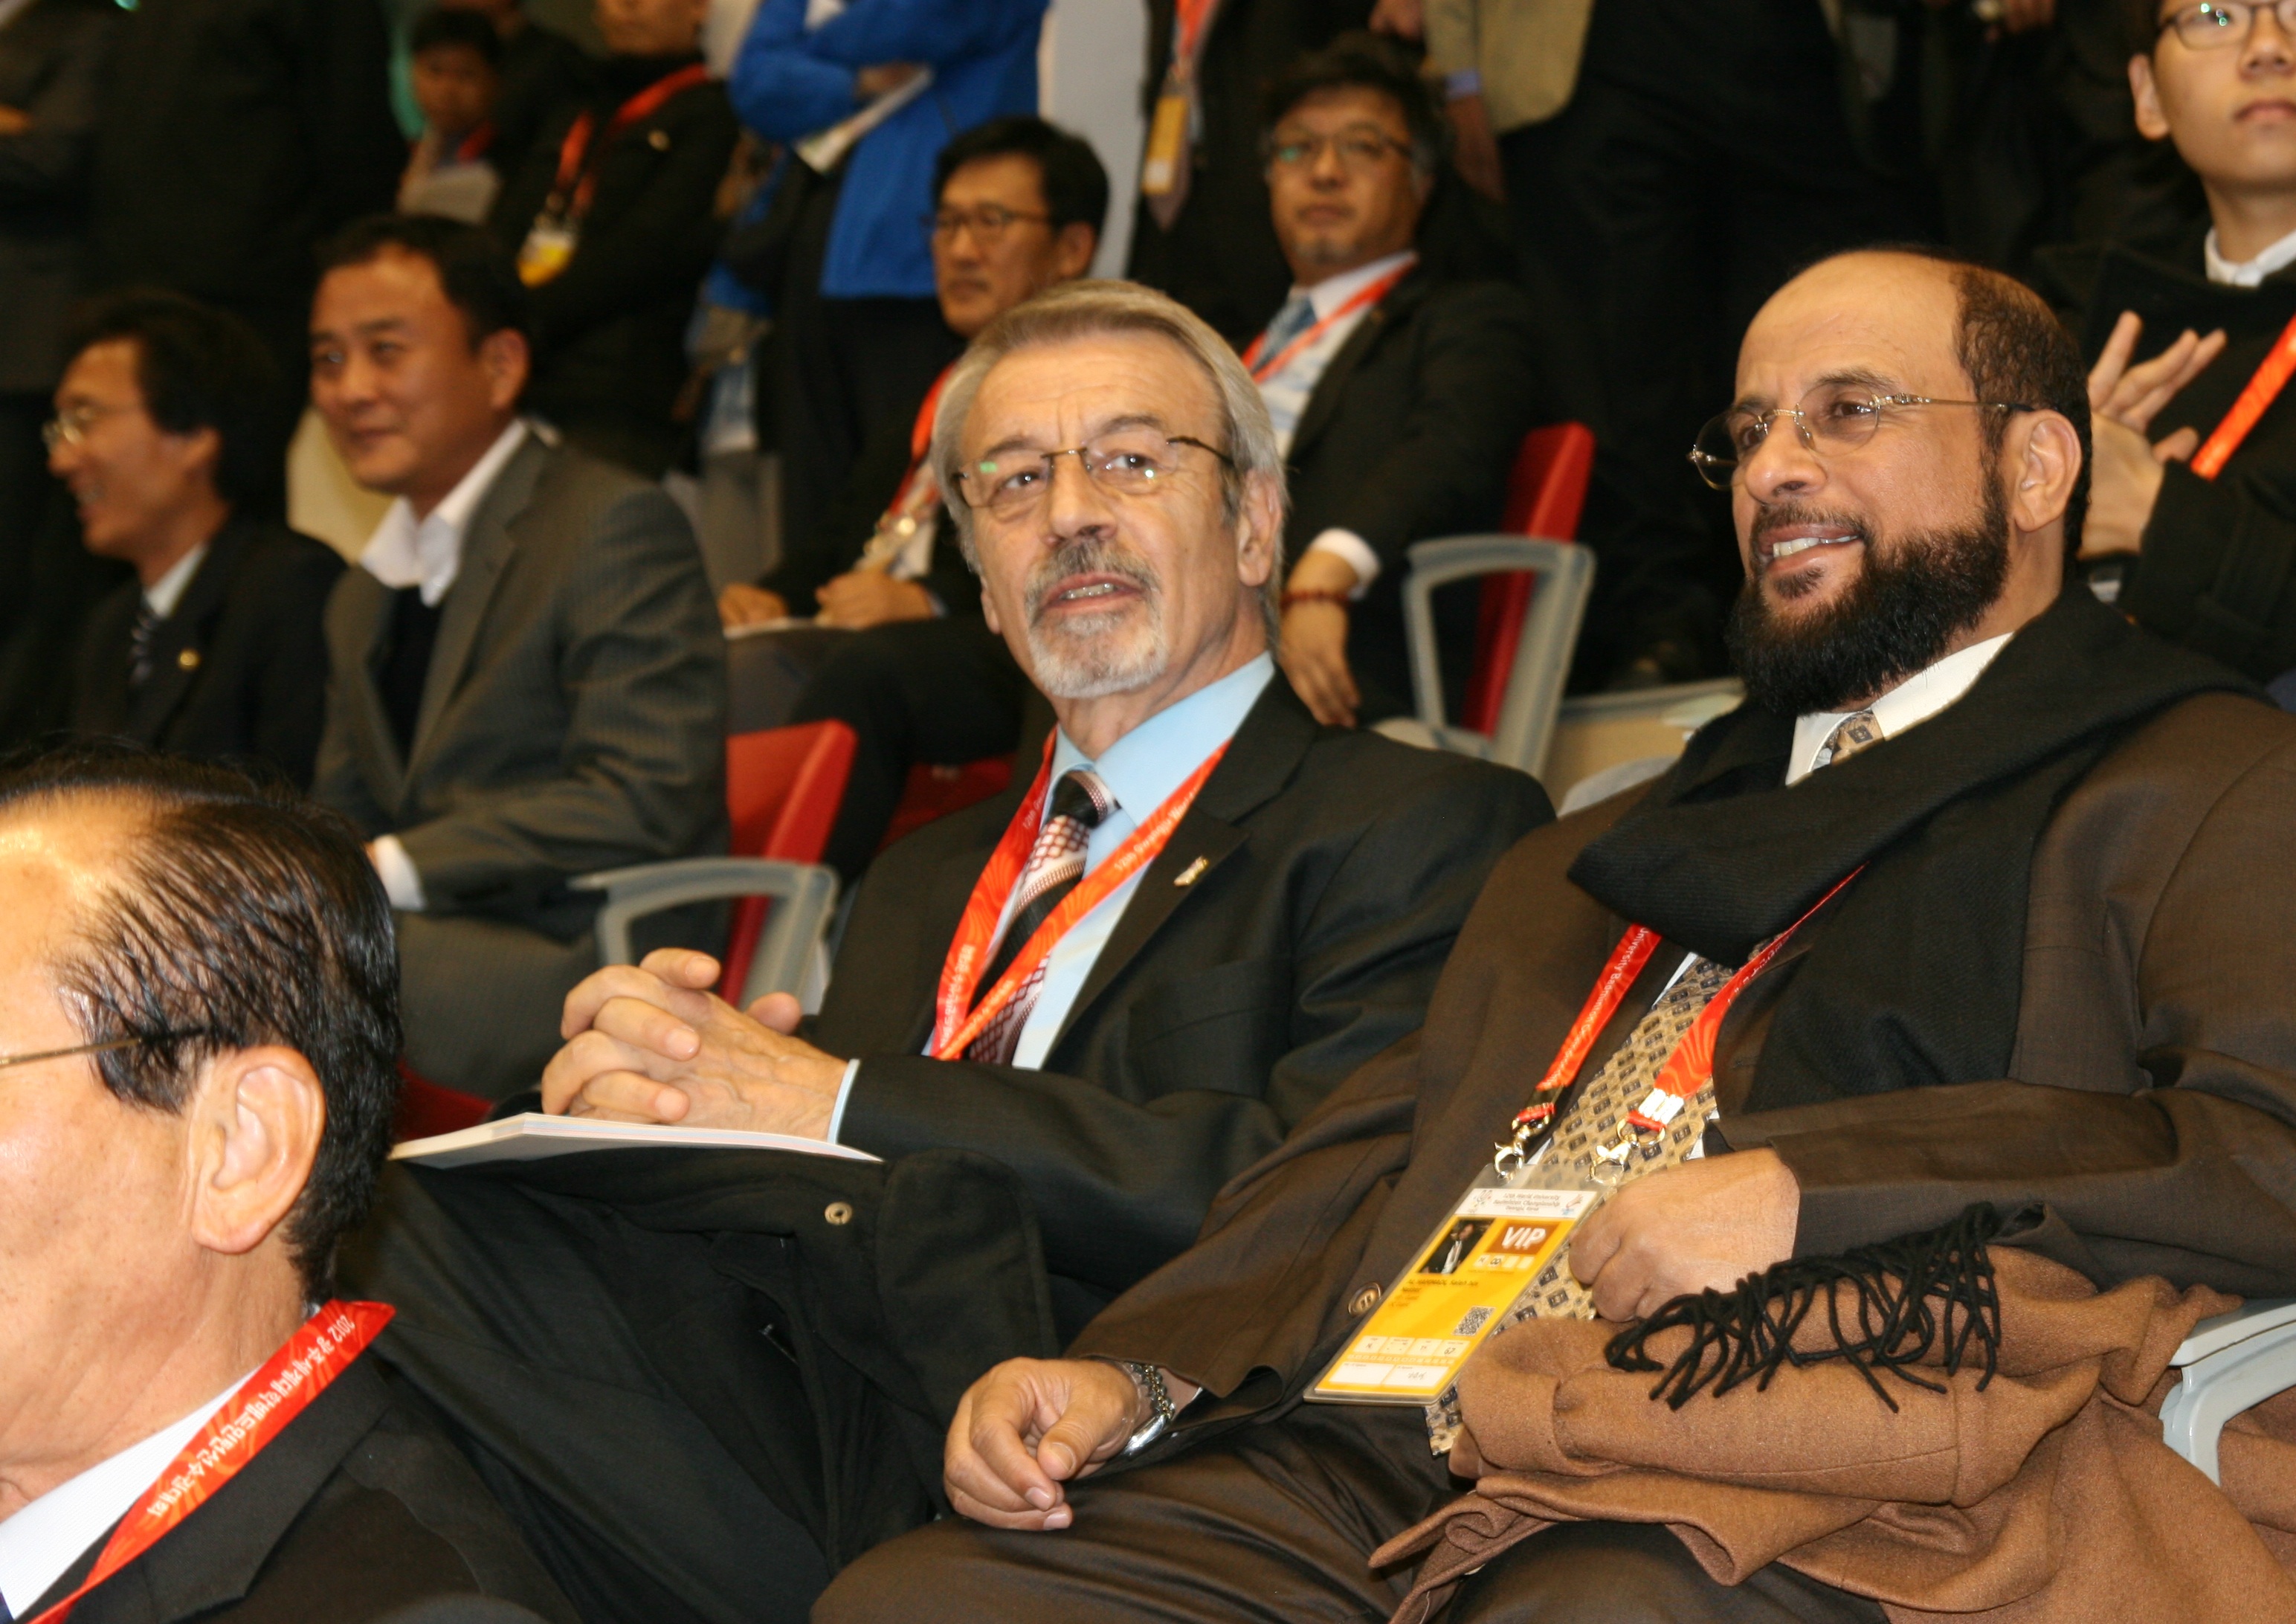 AIPS reporters at WUBC opening ceremony